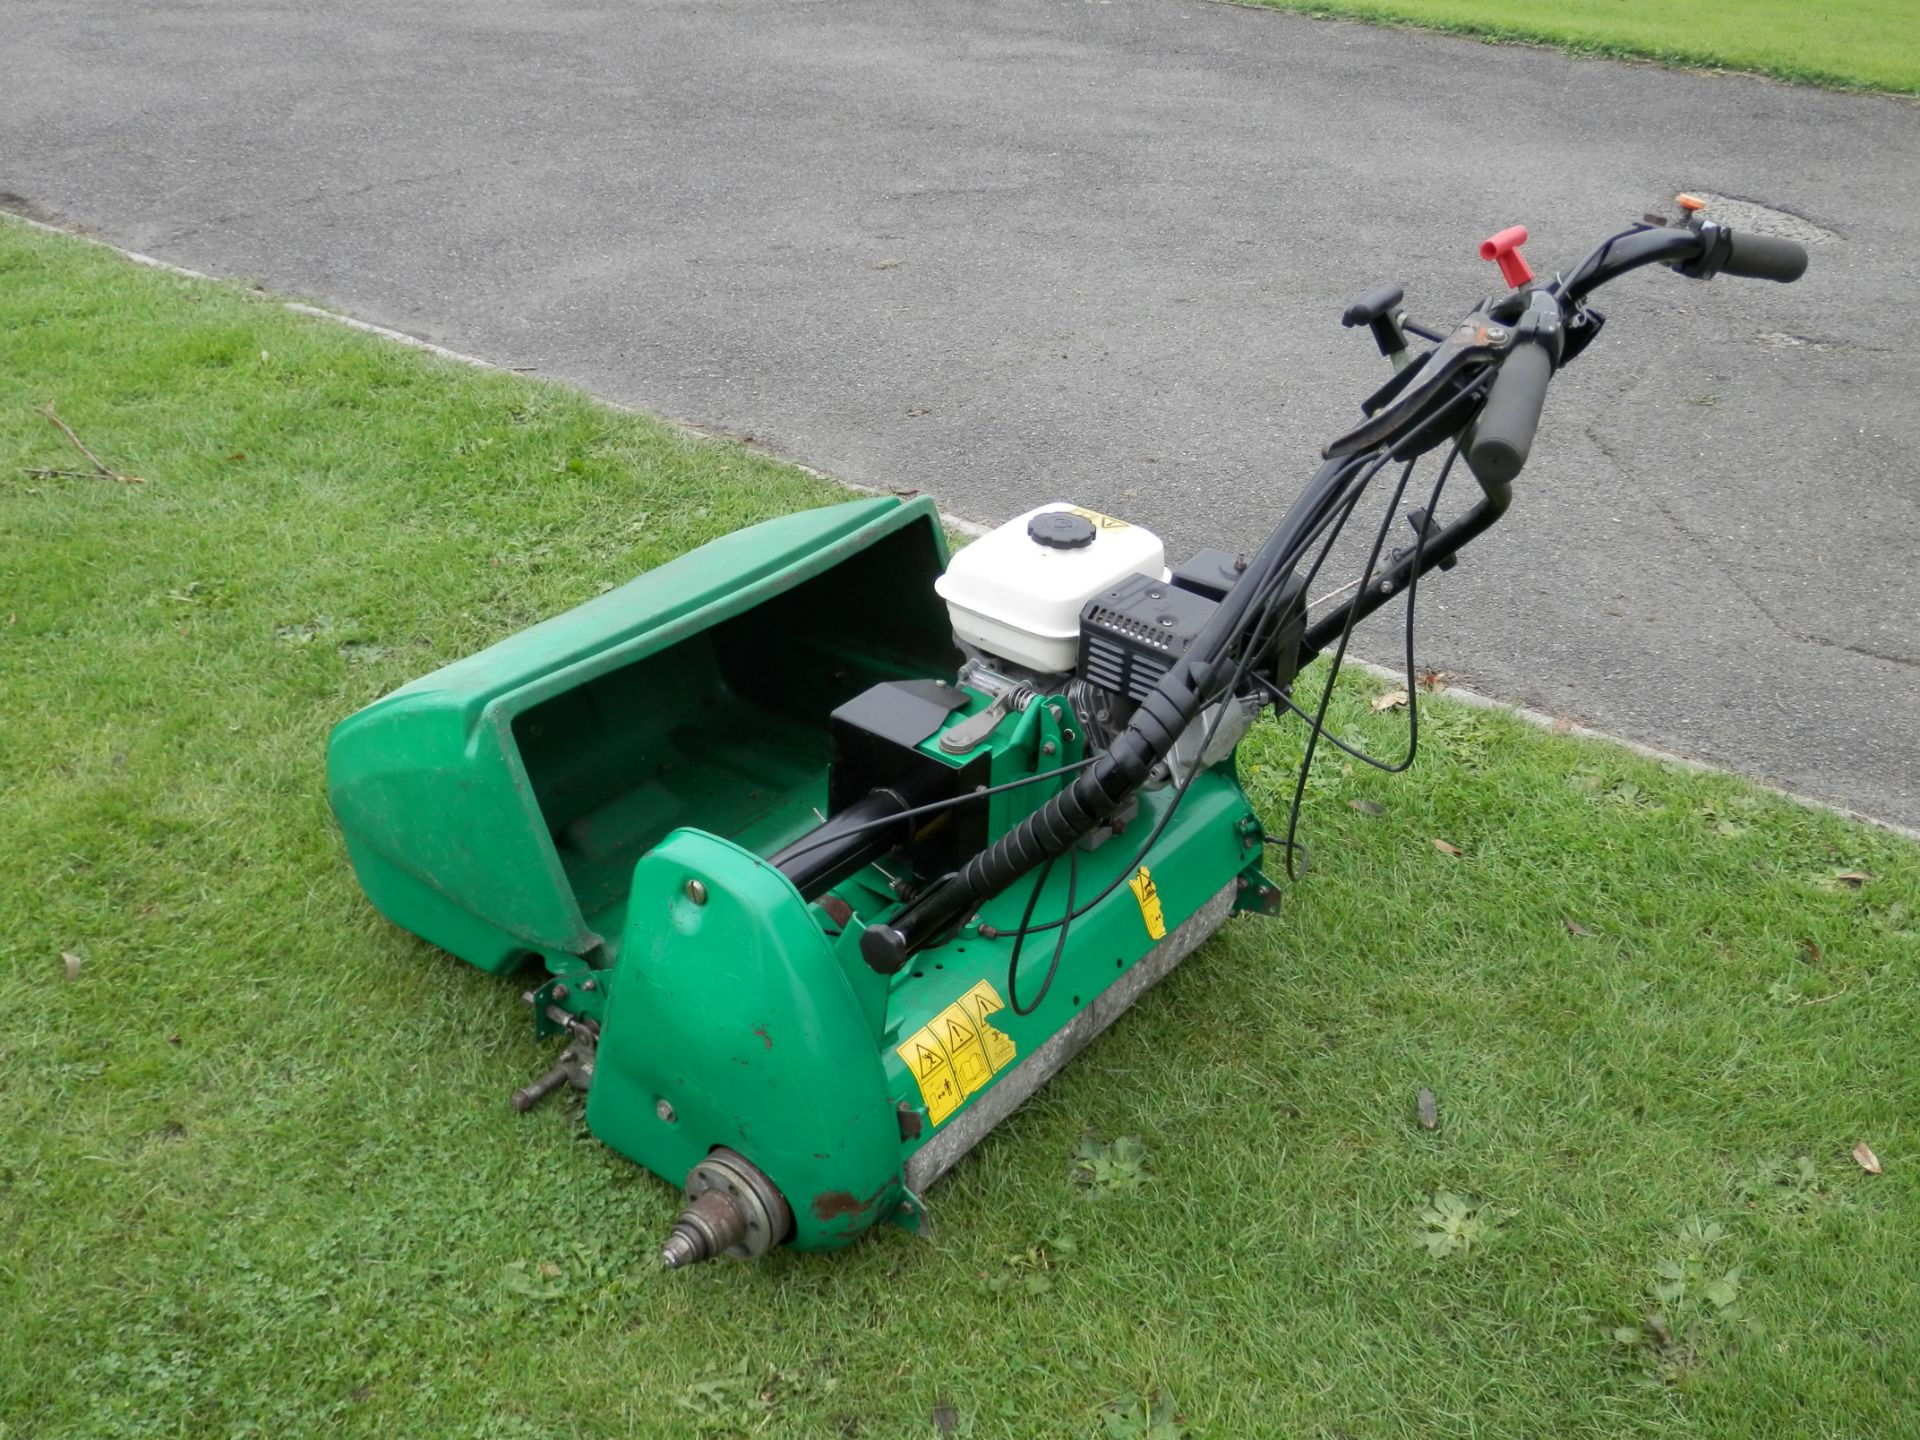 2004 WORKING RANSOMES SUPER CERTES 61CM CUT SELF PROPELLED HONDA ENGINED MOWER. - Image 7 of 10